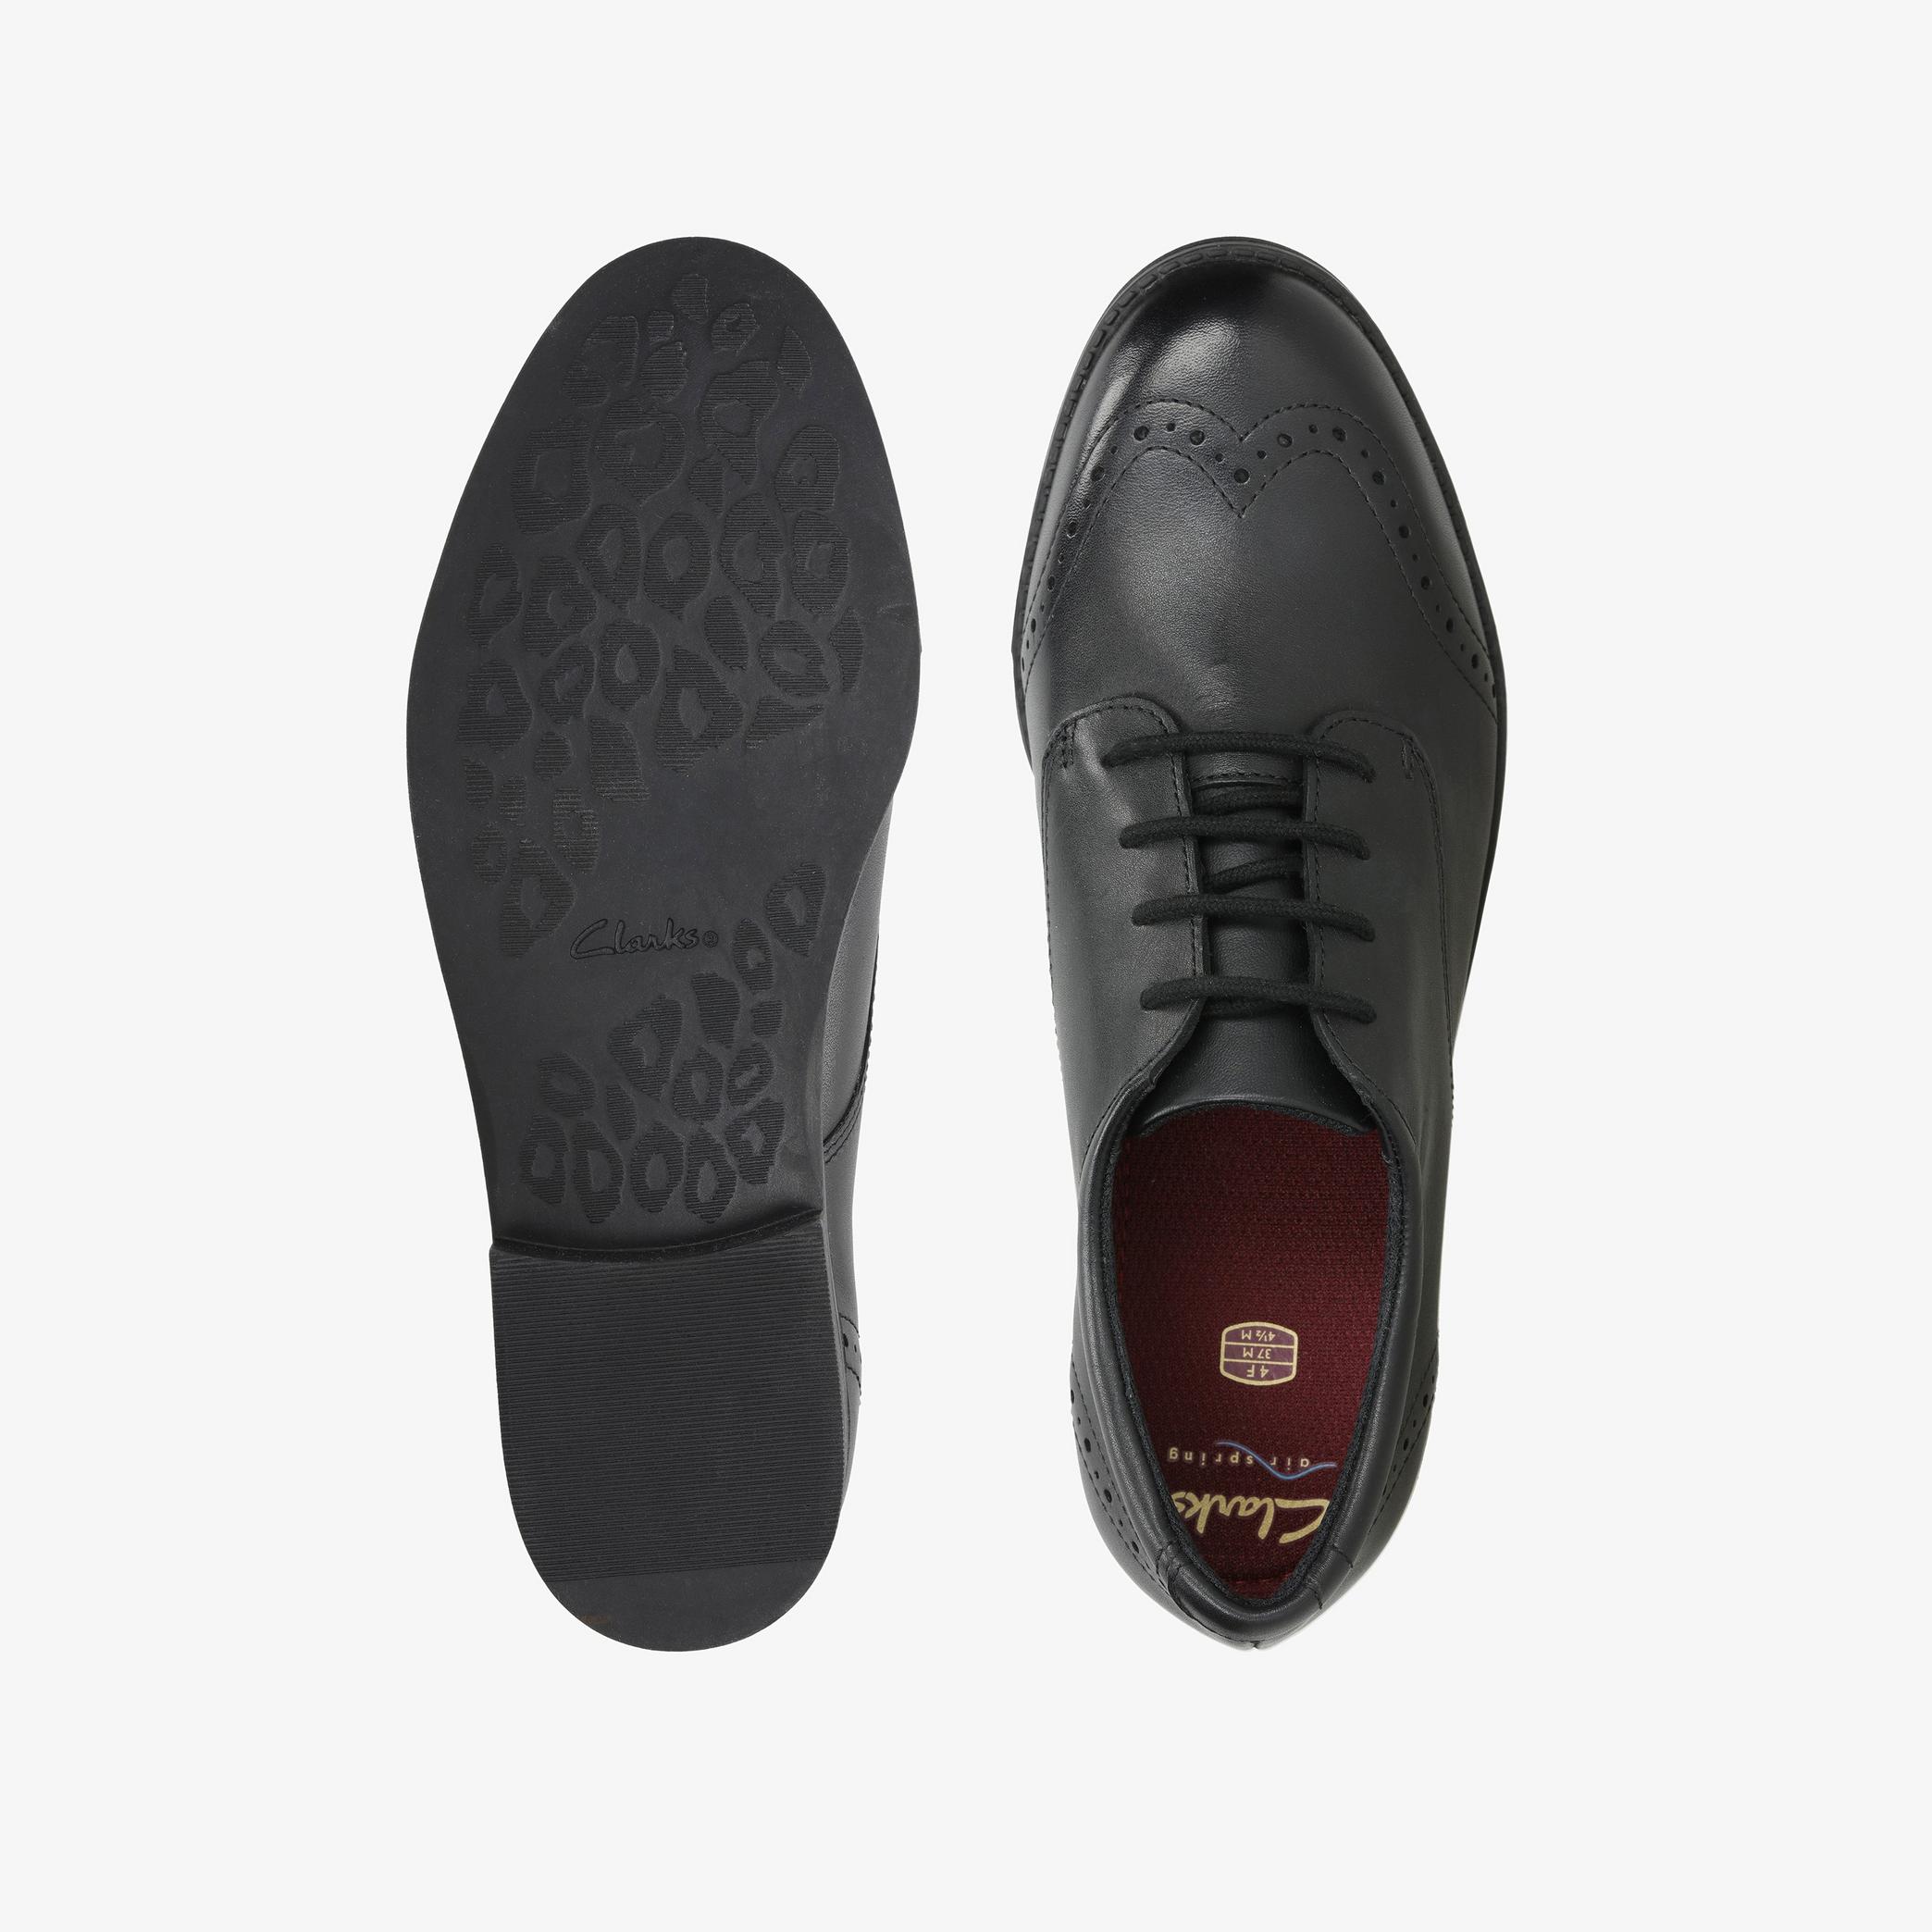 Sami Walk Youth Black Leather Brogues, view 6 of 6